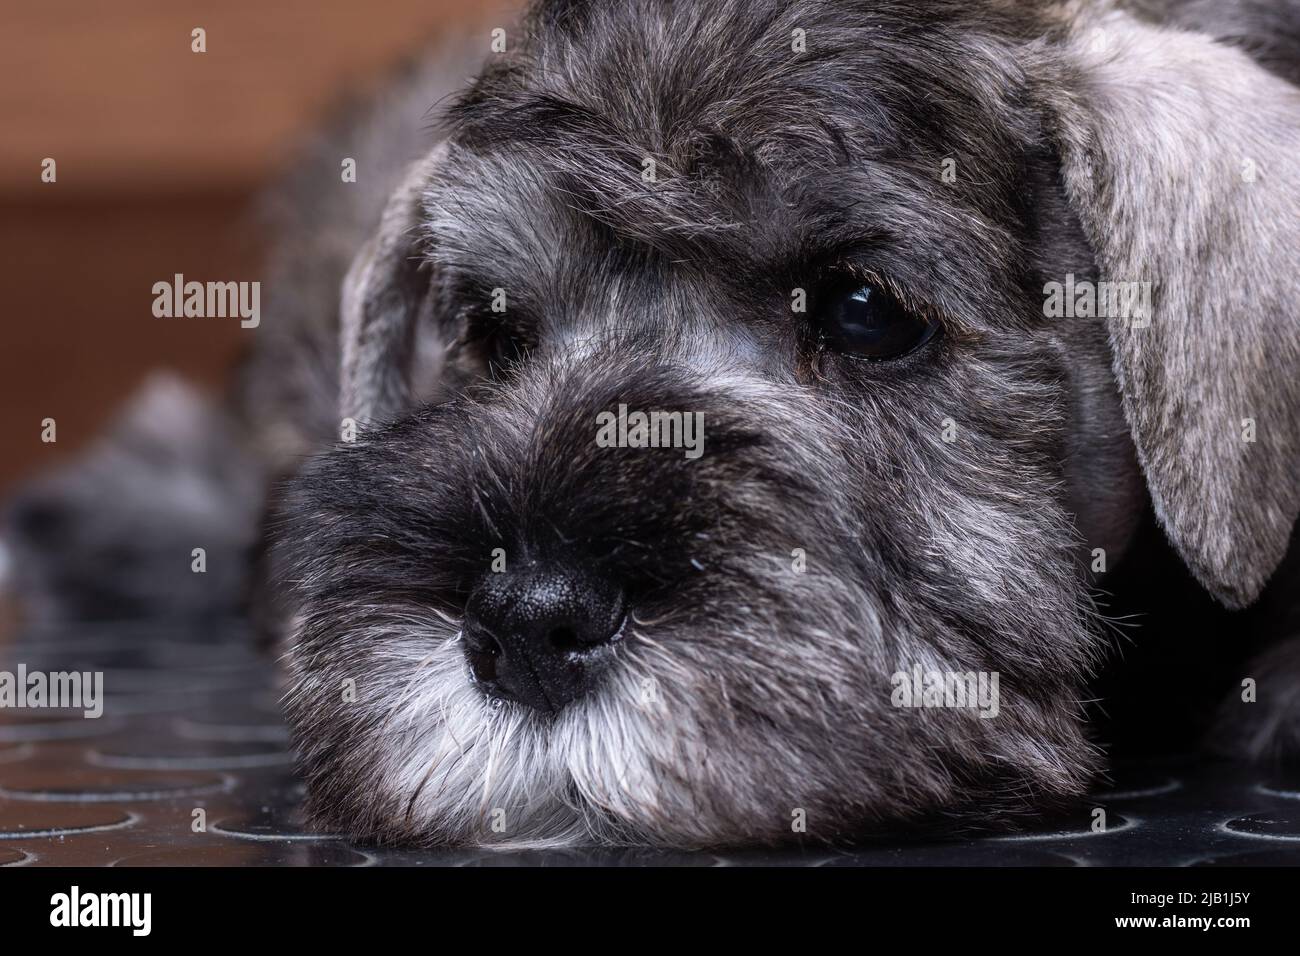 A small bearded miniature schnauzer puppy lying on a grooming table. Grooming puppies. Pet care. Stock Photo